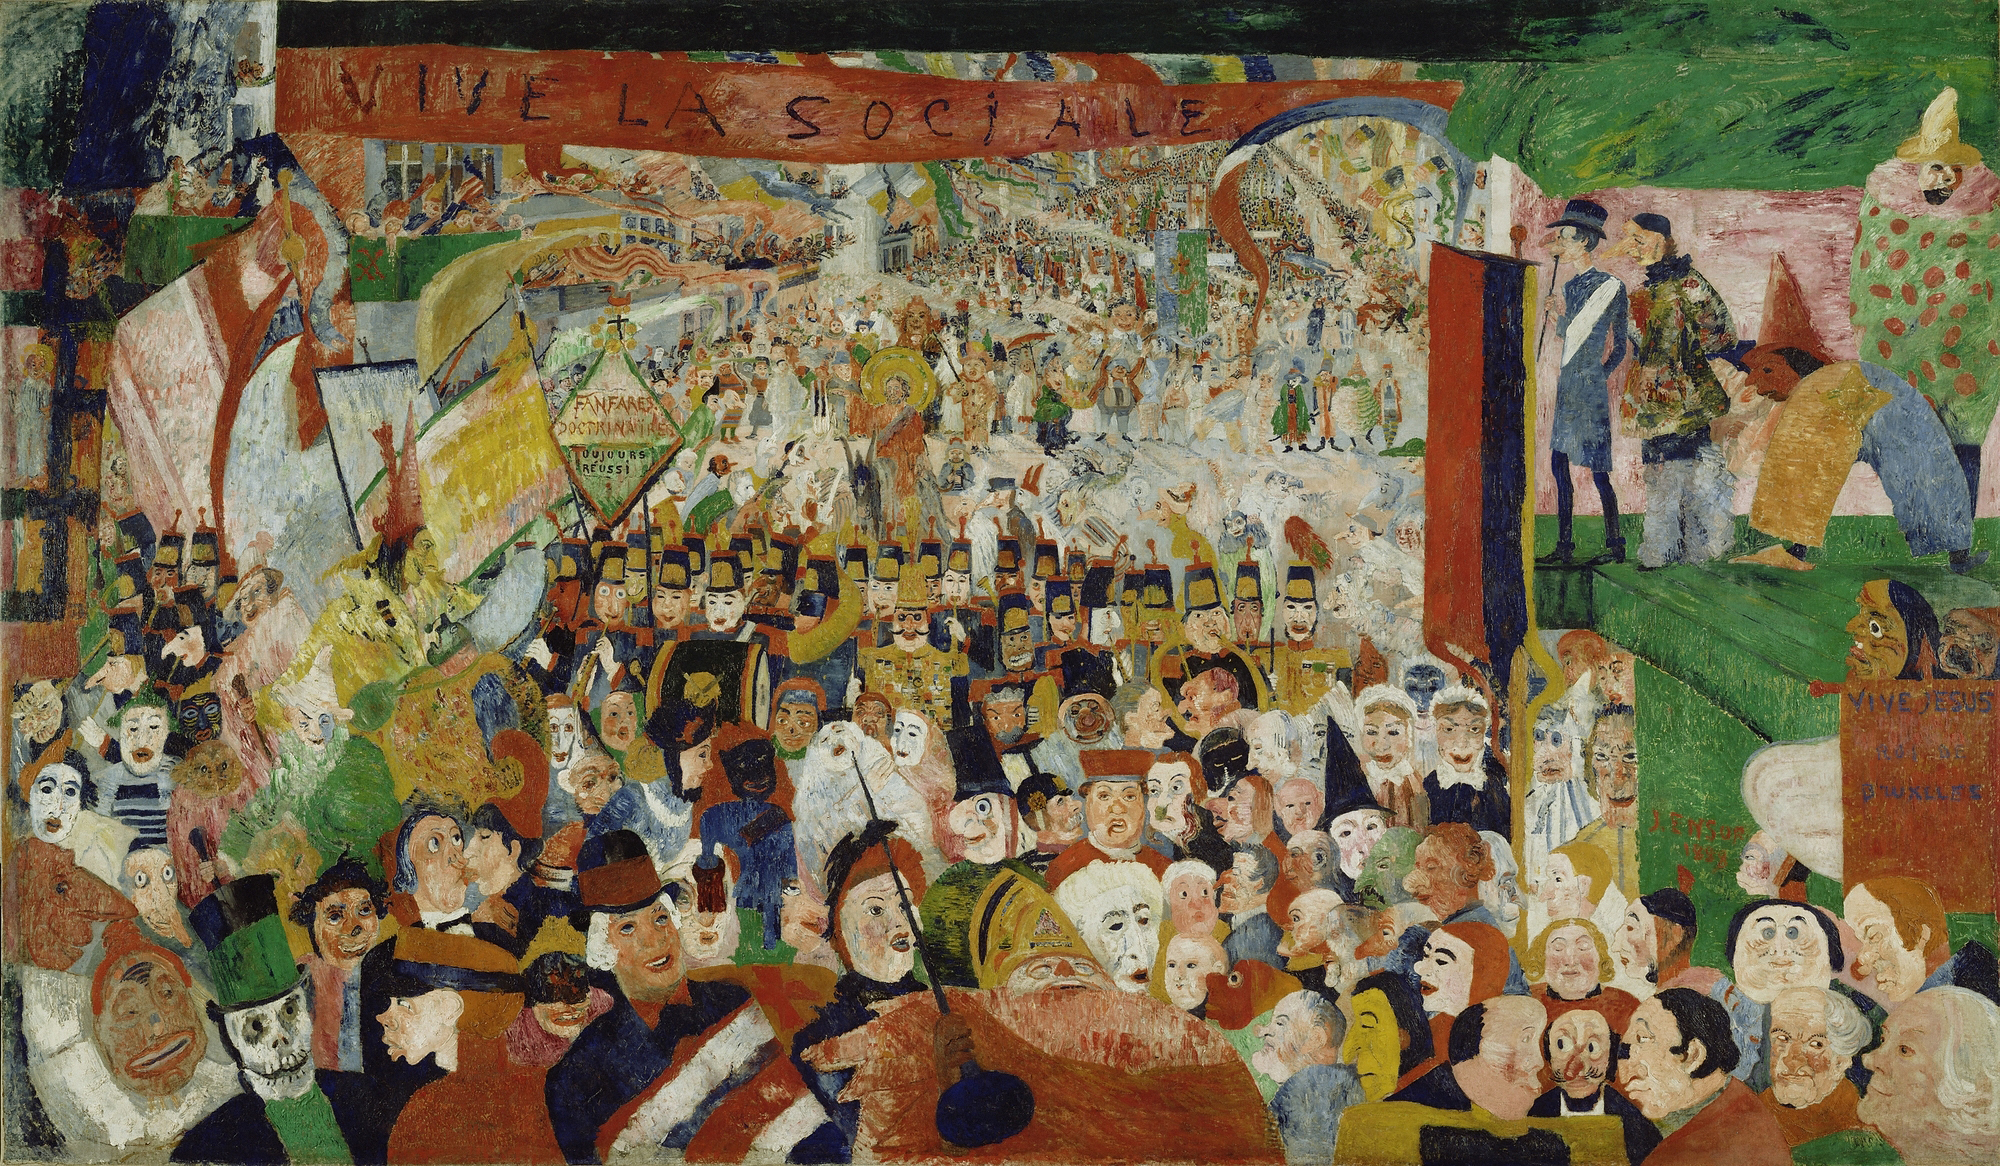 James Ensor, Christ's Entry into Brussels in 1889, 1888/1889, oil on canvas. The J. Paul Getty Museum, Los Angeles